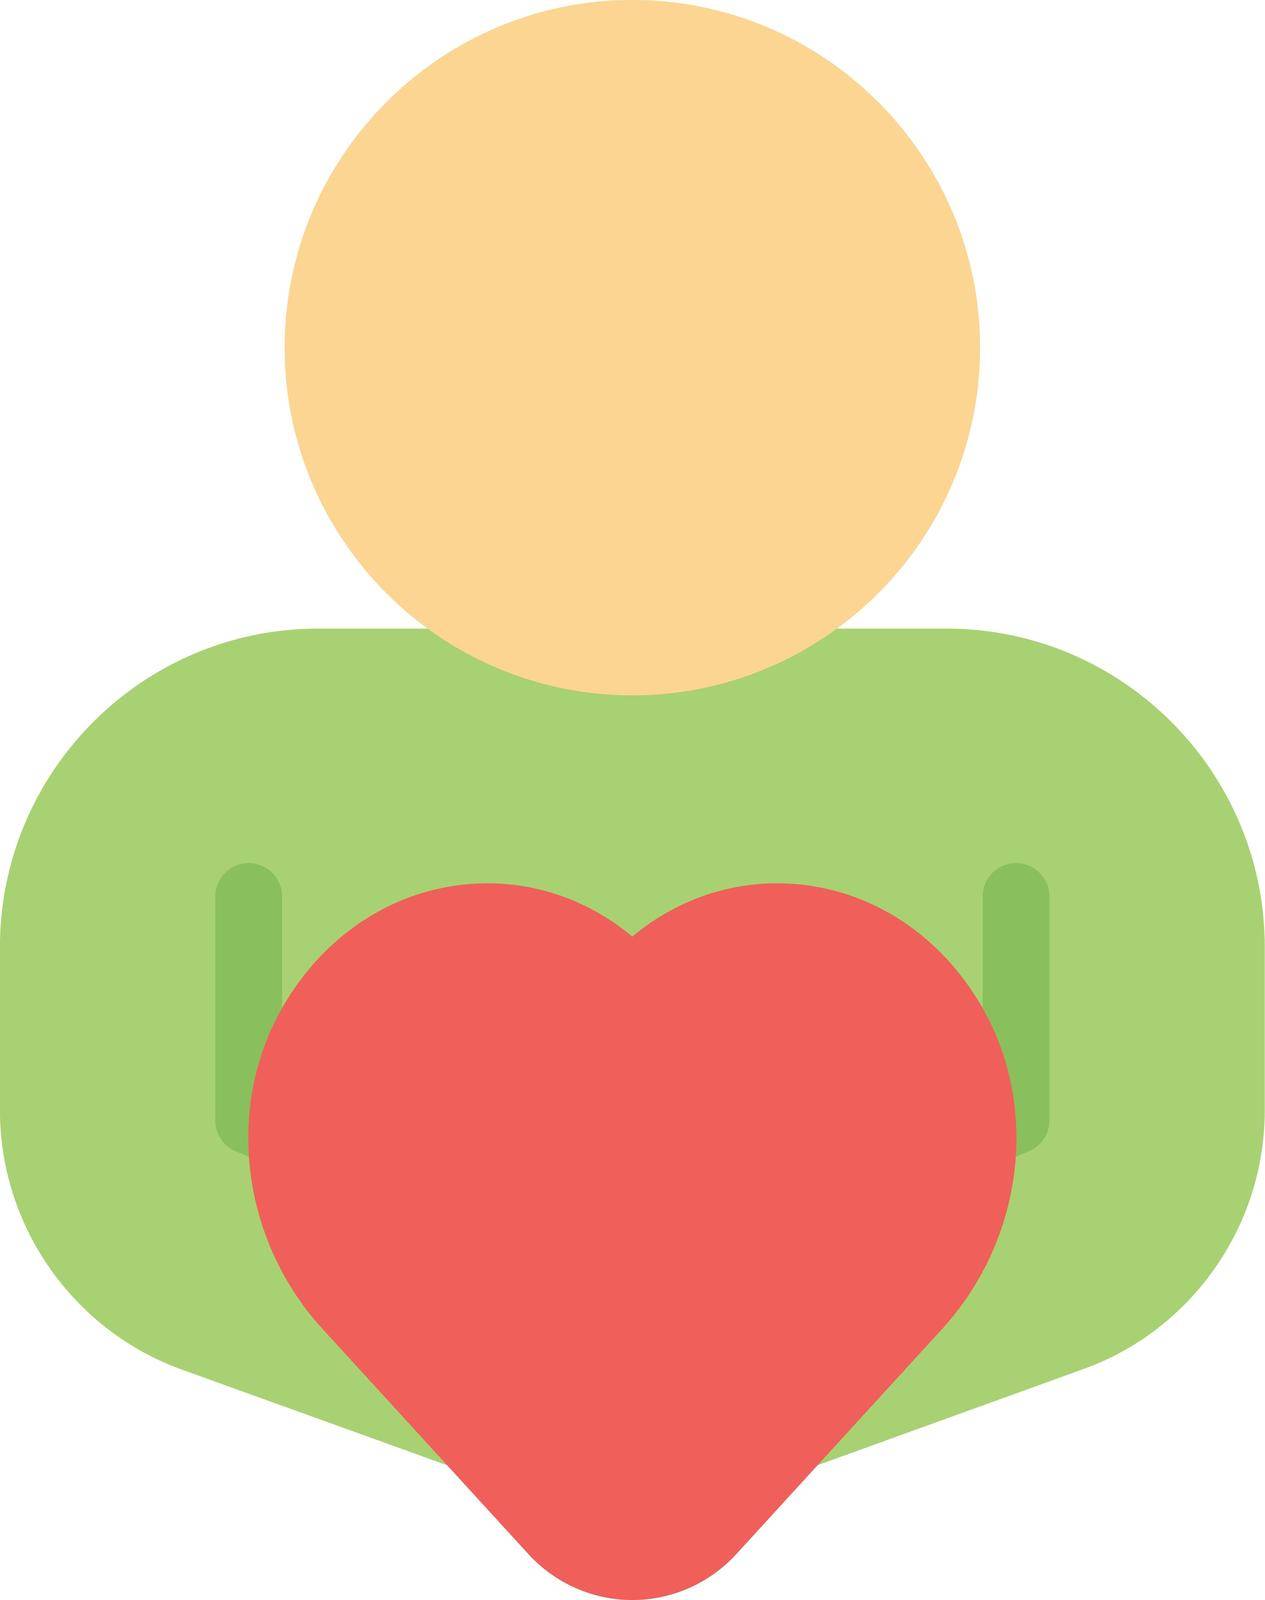 heart by FlaticonsDesign